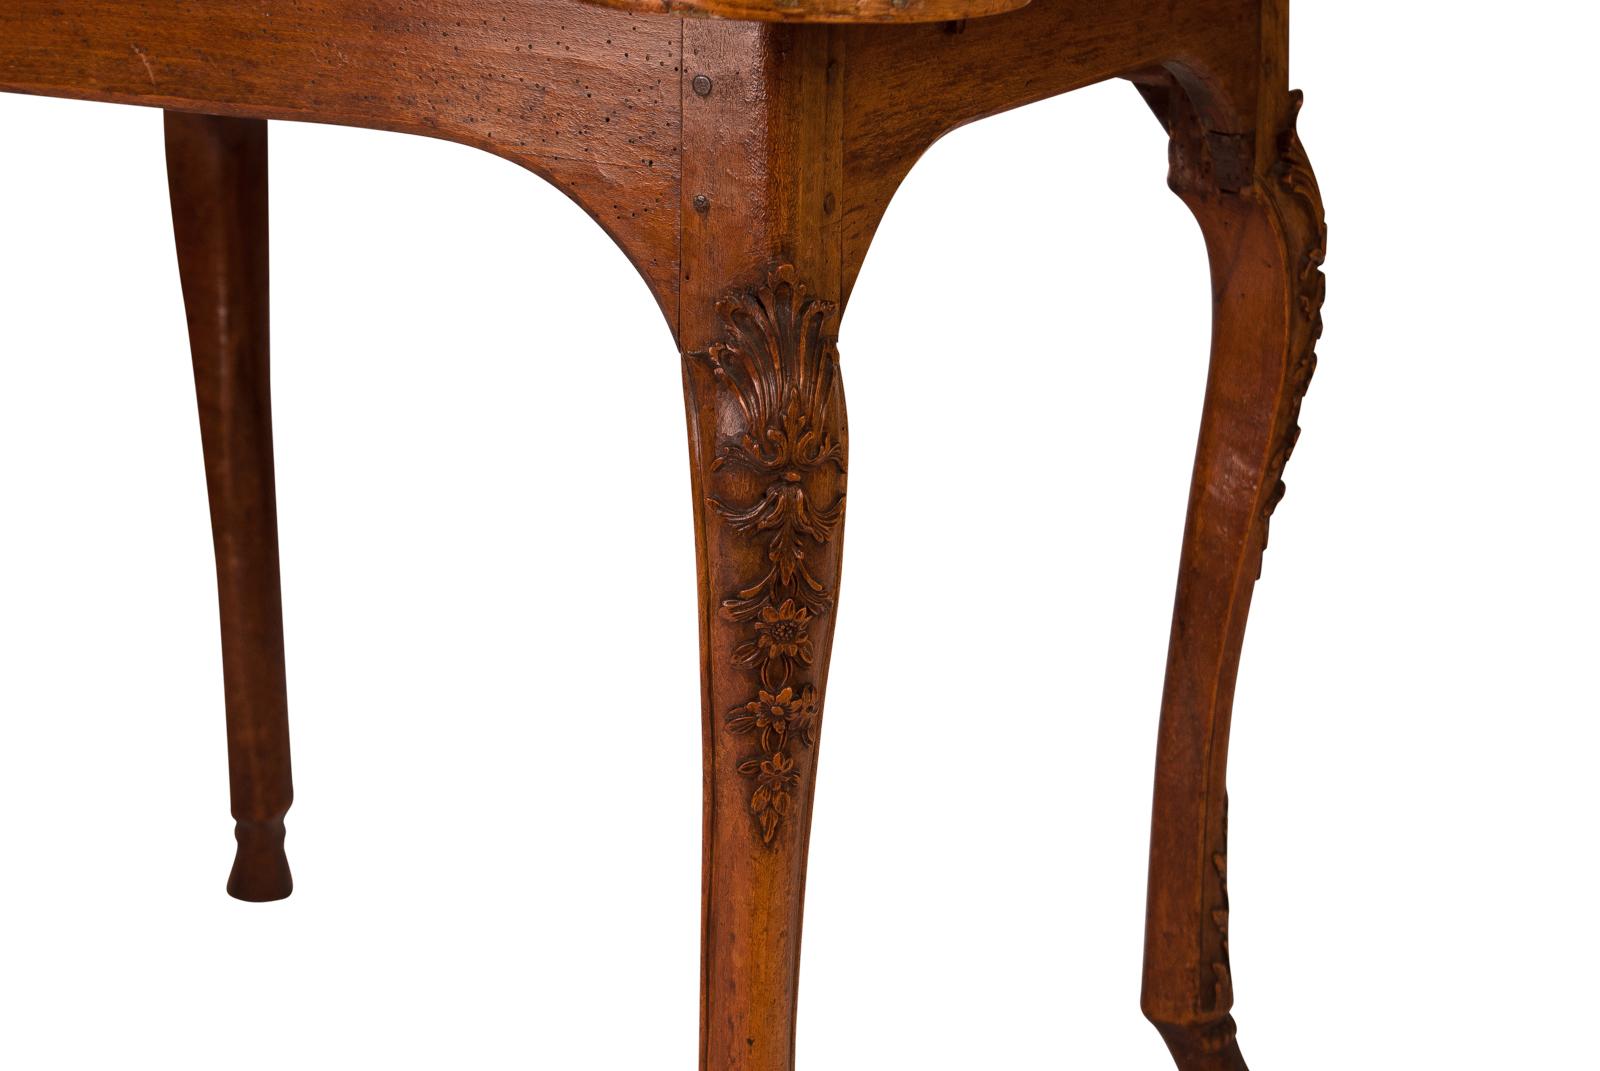 Exceptional Louis XV Carved Fruitwood Game Table, France, circa 1750 (18. Jahrhundert)